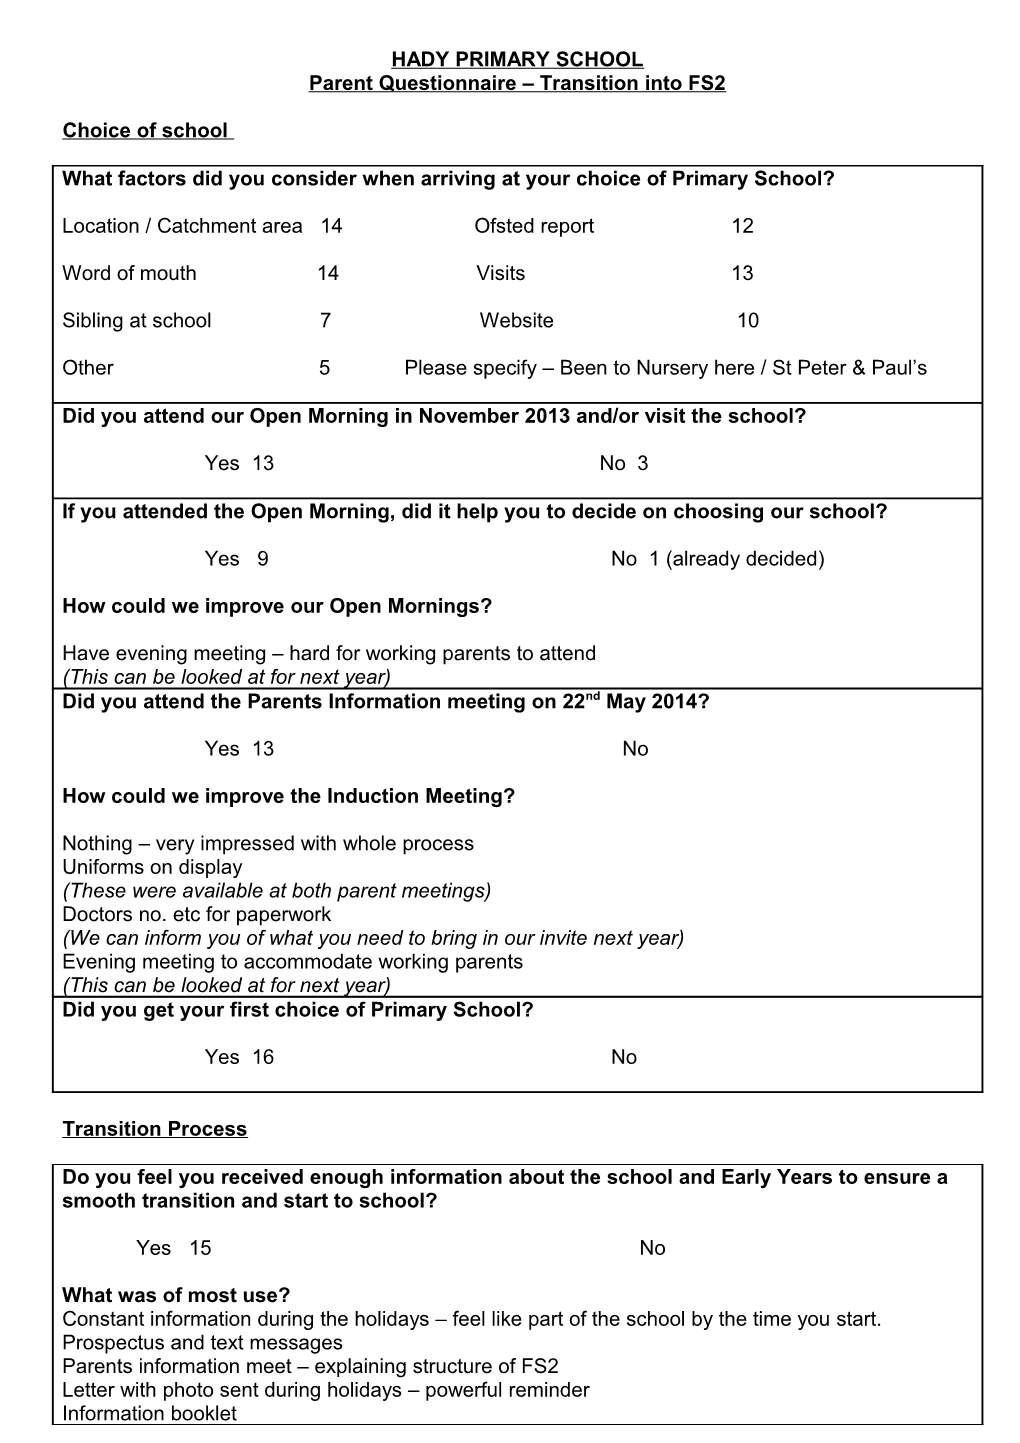 Parent Questionnaire Transition Into the Early Years Foundation Stage